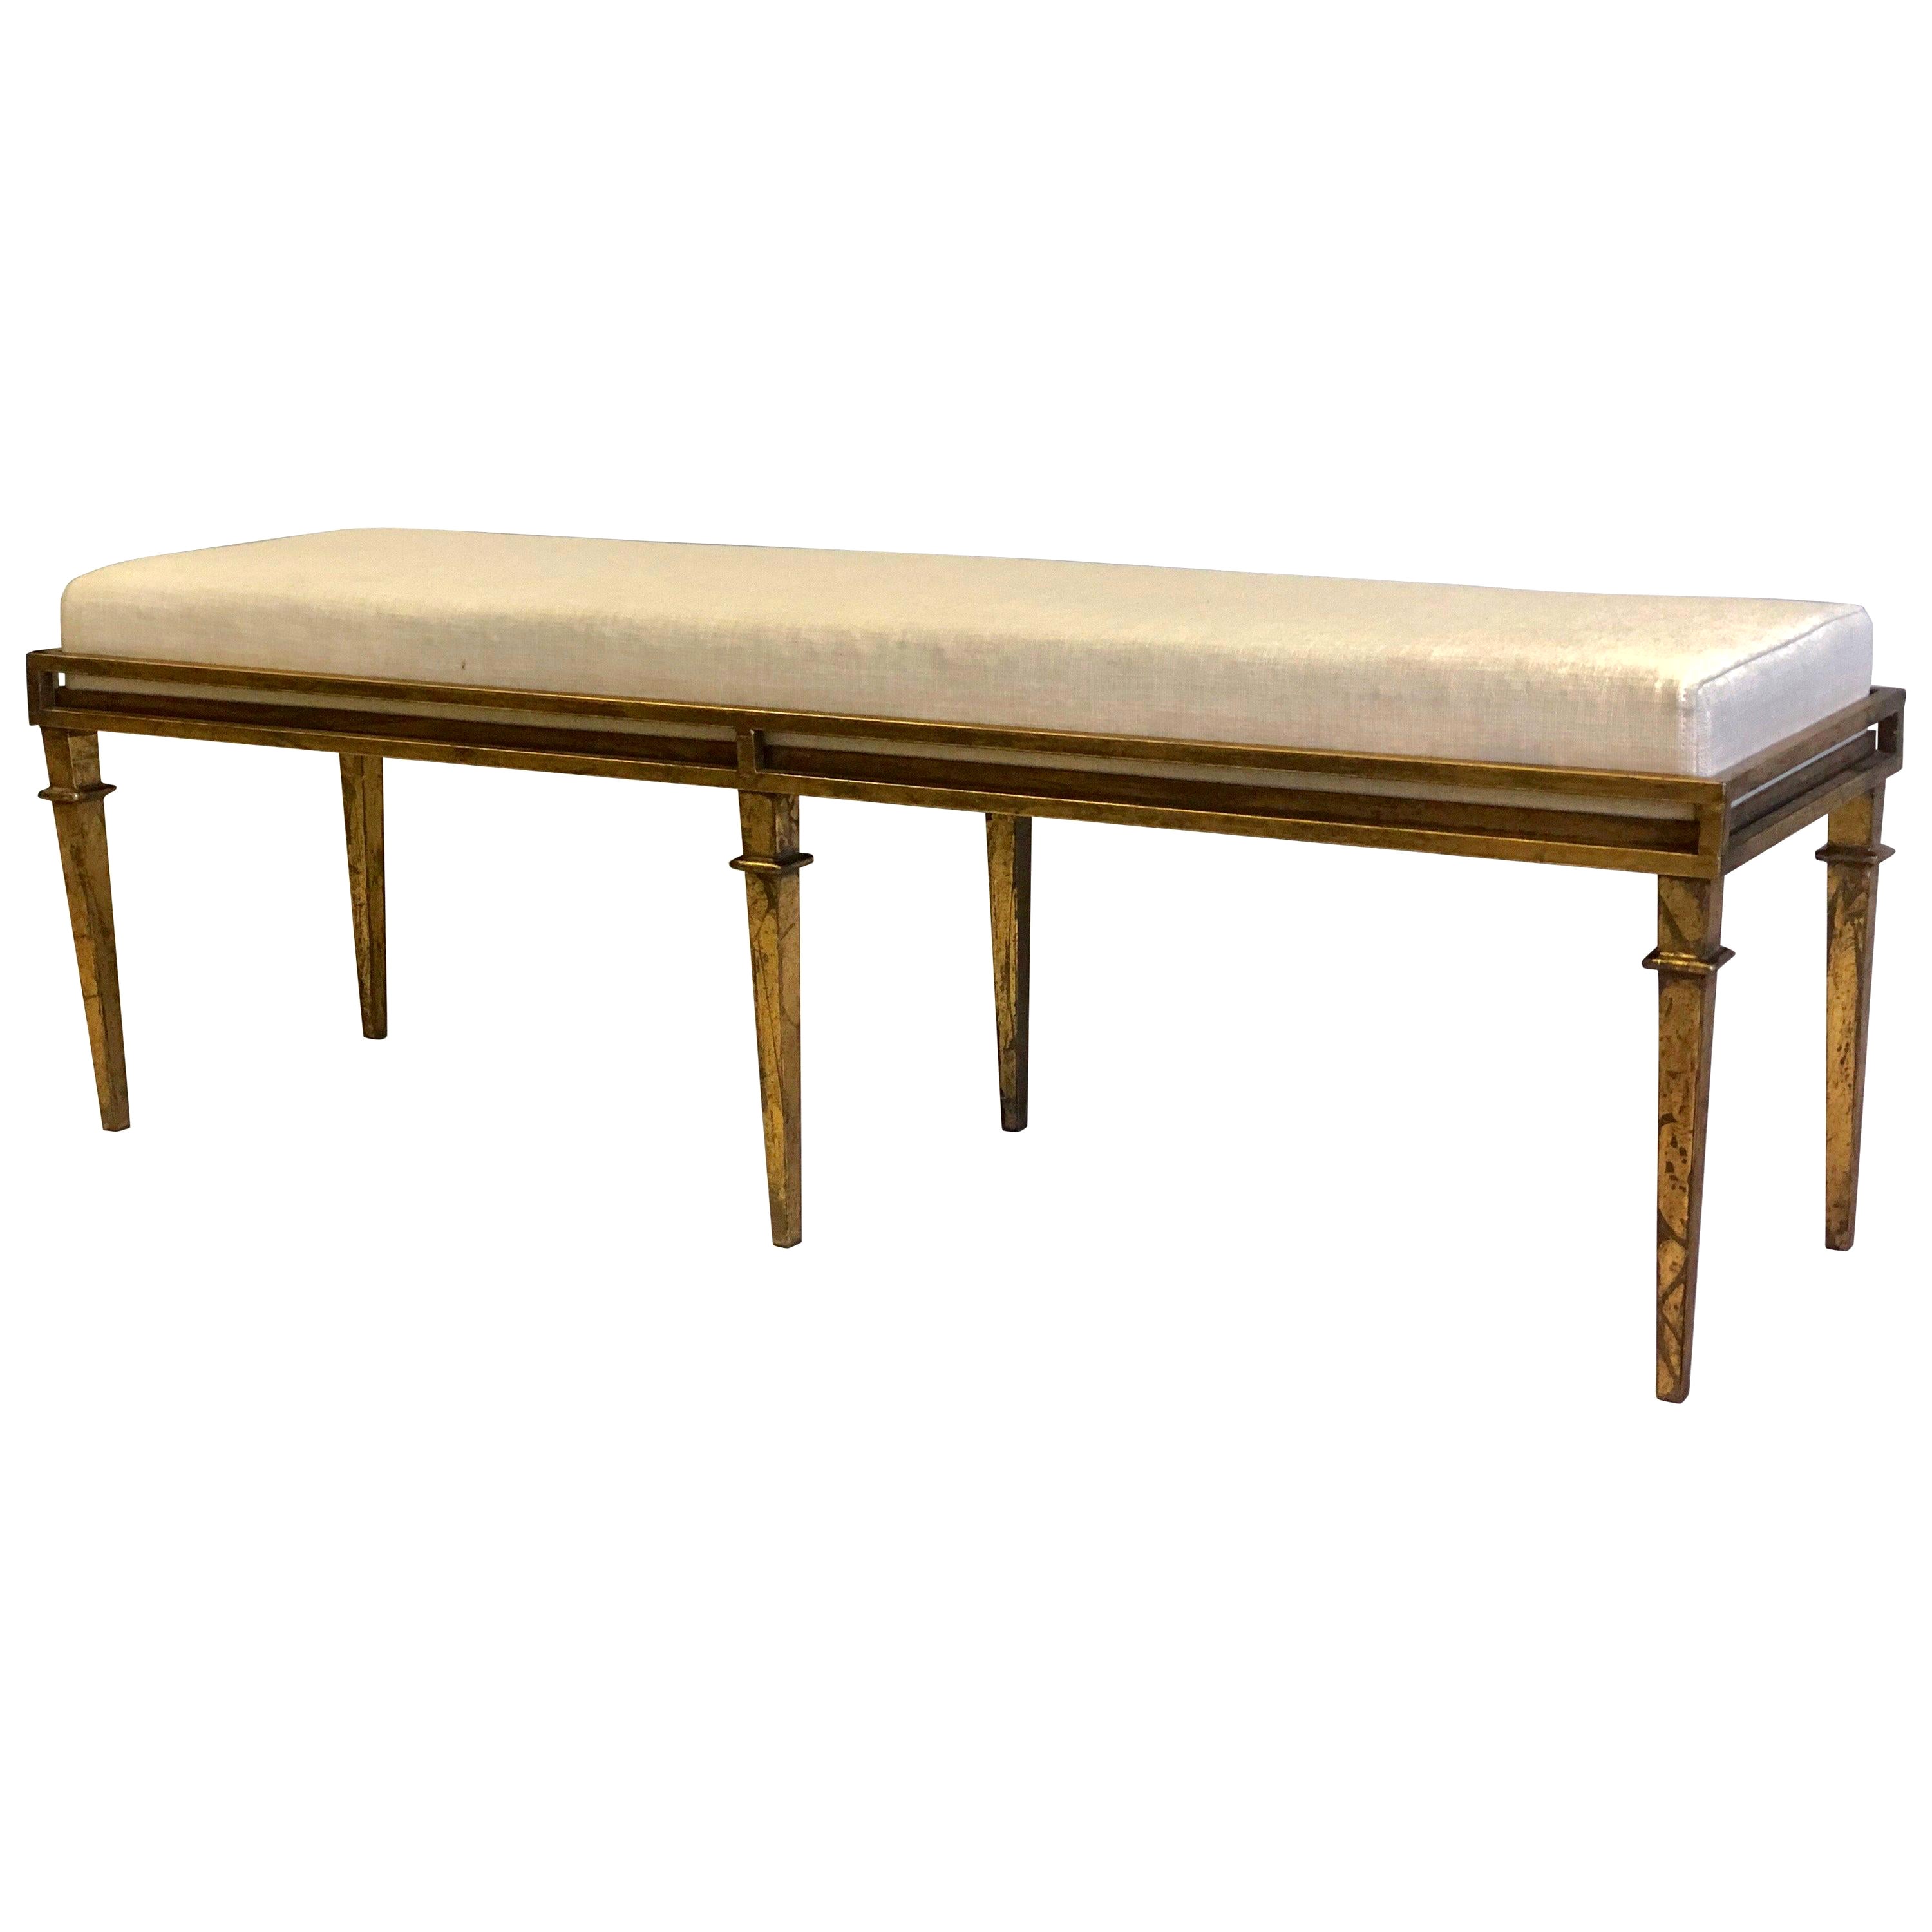 French Modern Neoclassical Gilt Iron Bench in the style of Maison Ramsay For Sale